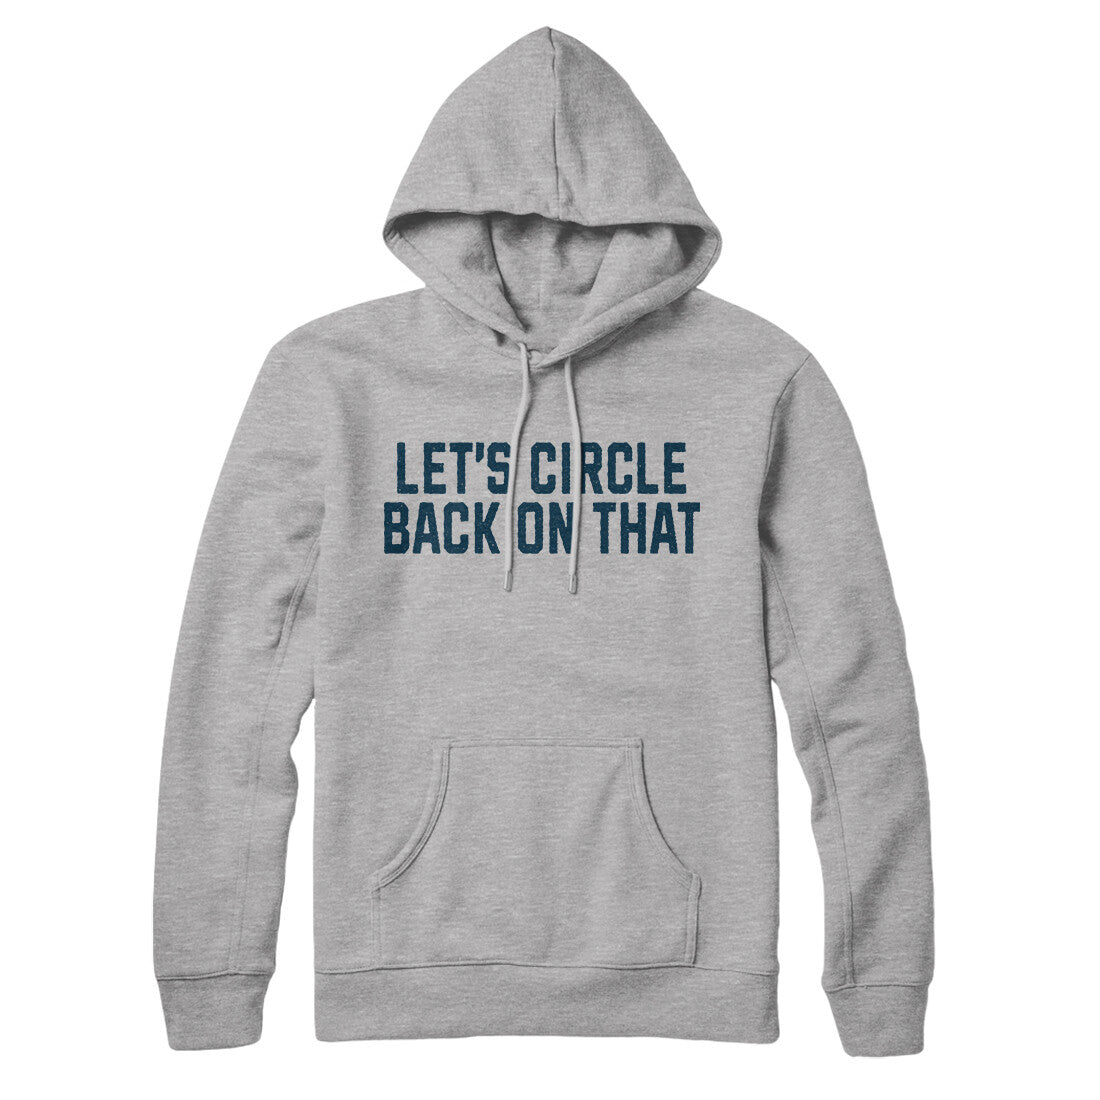 Let's Circle Back on That in Heather Grey Color